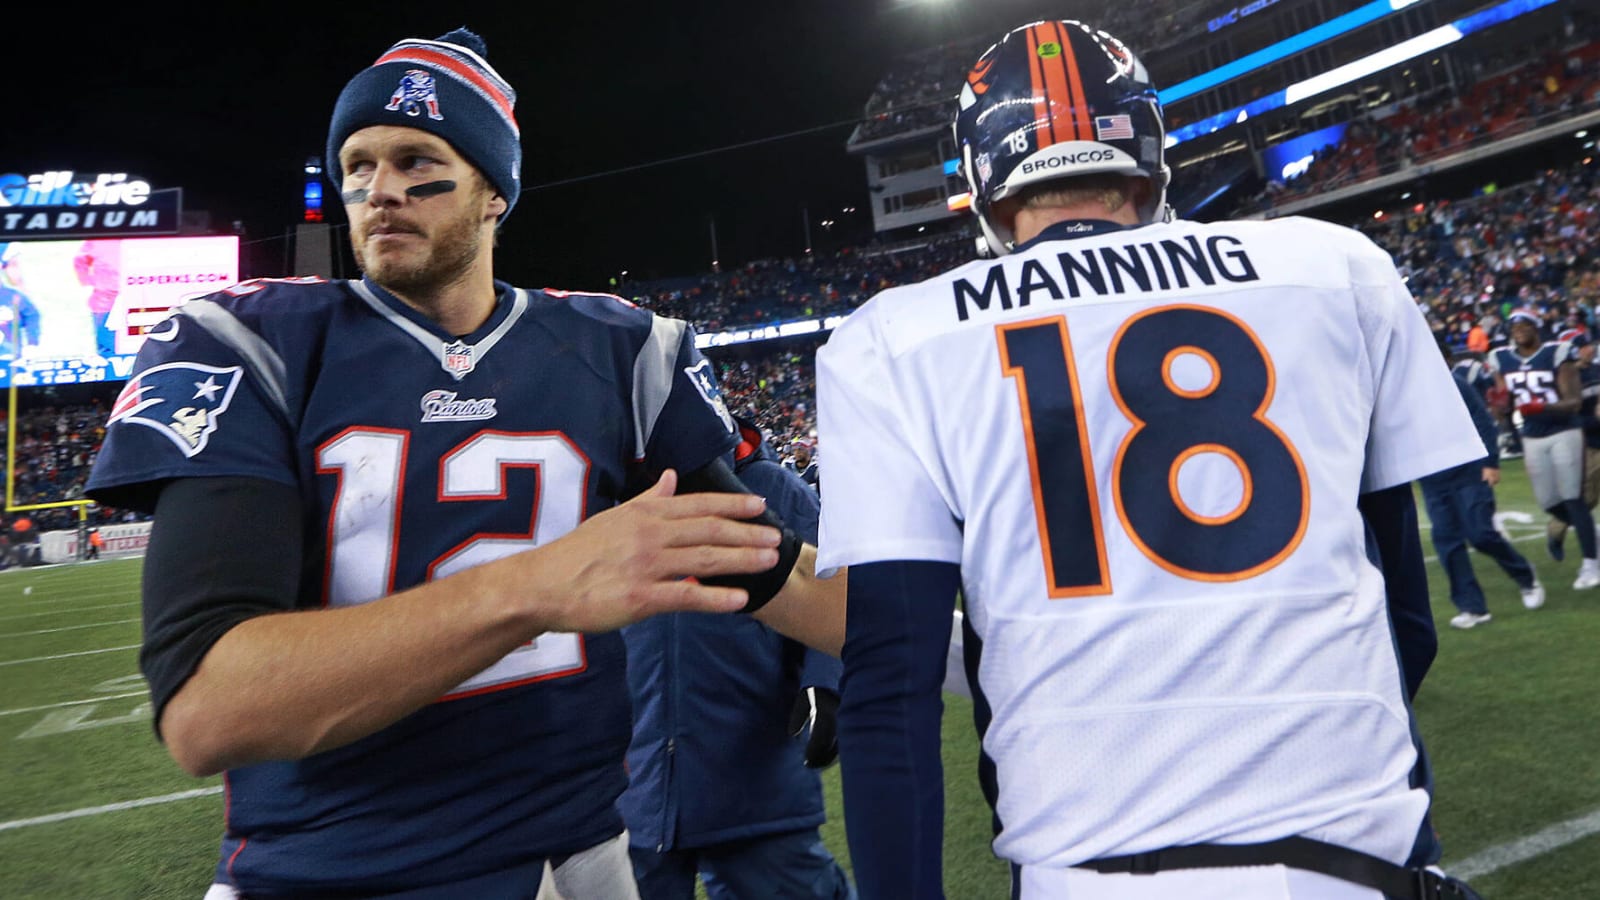 The greatest QB rivalries in NFL history